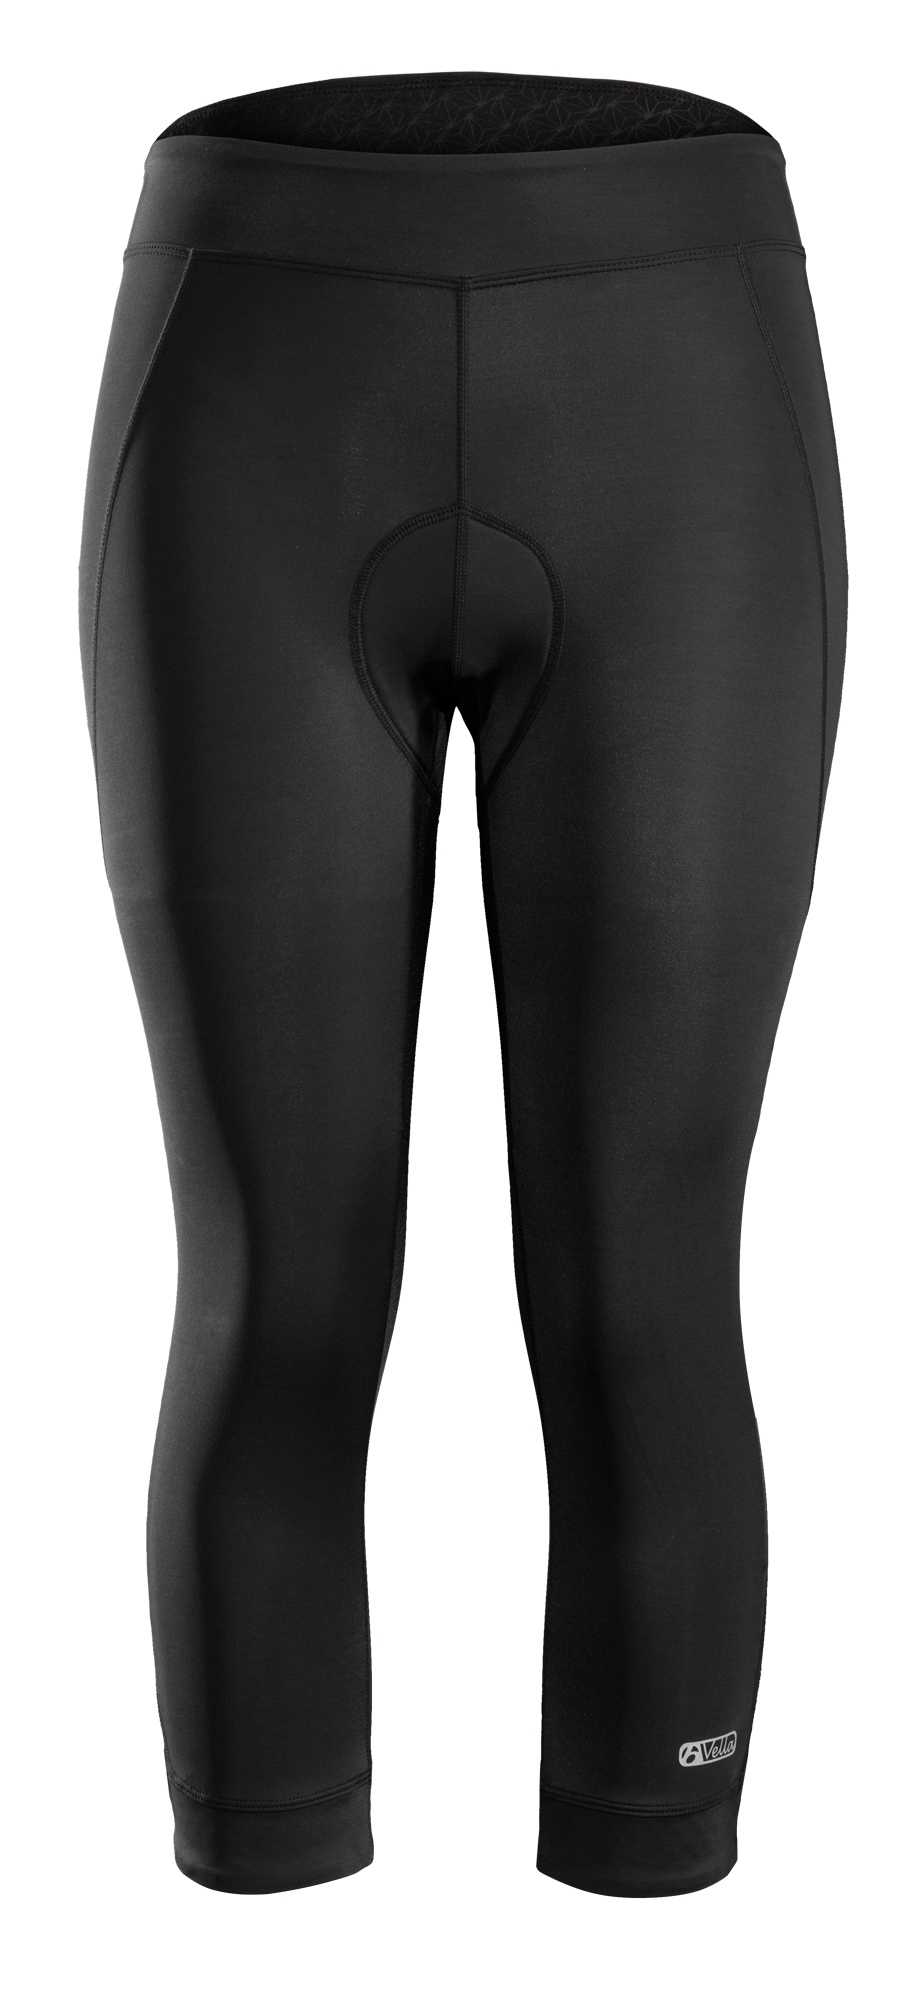 best cycling knickers